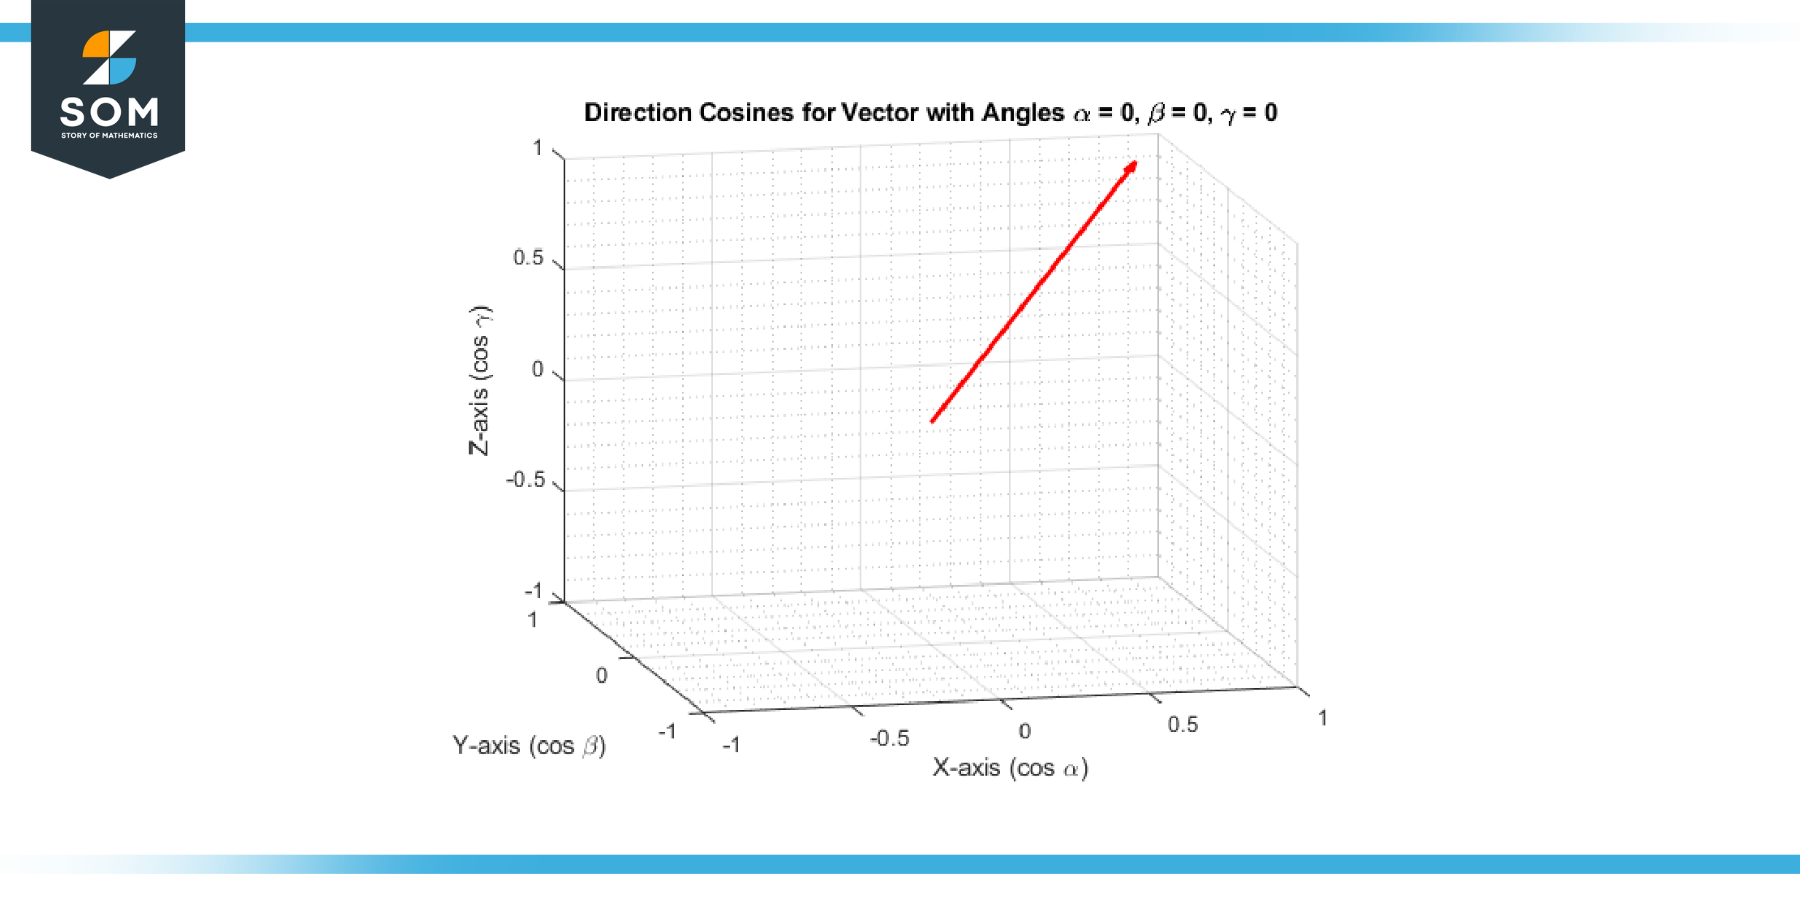 Graphical representation of direction cosines for vector with angles α0 β 0 γ0